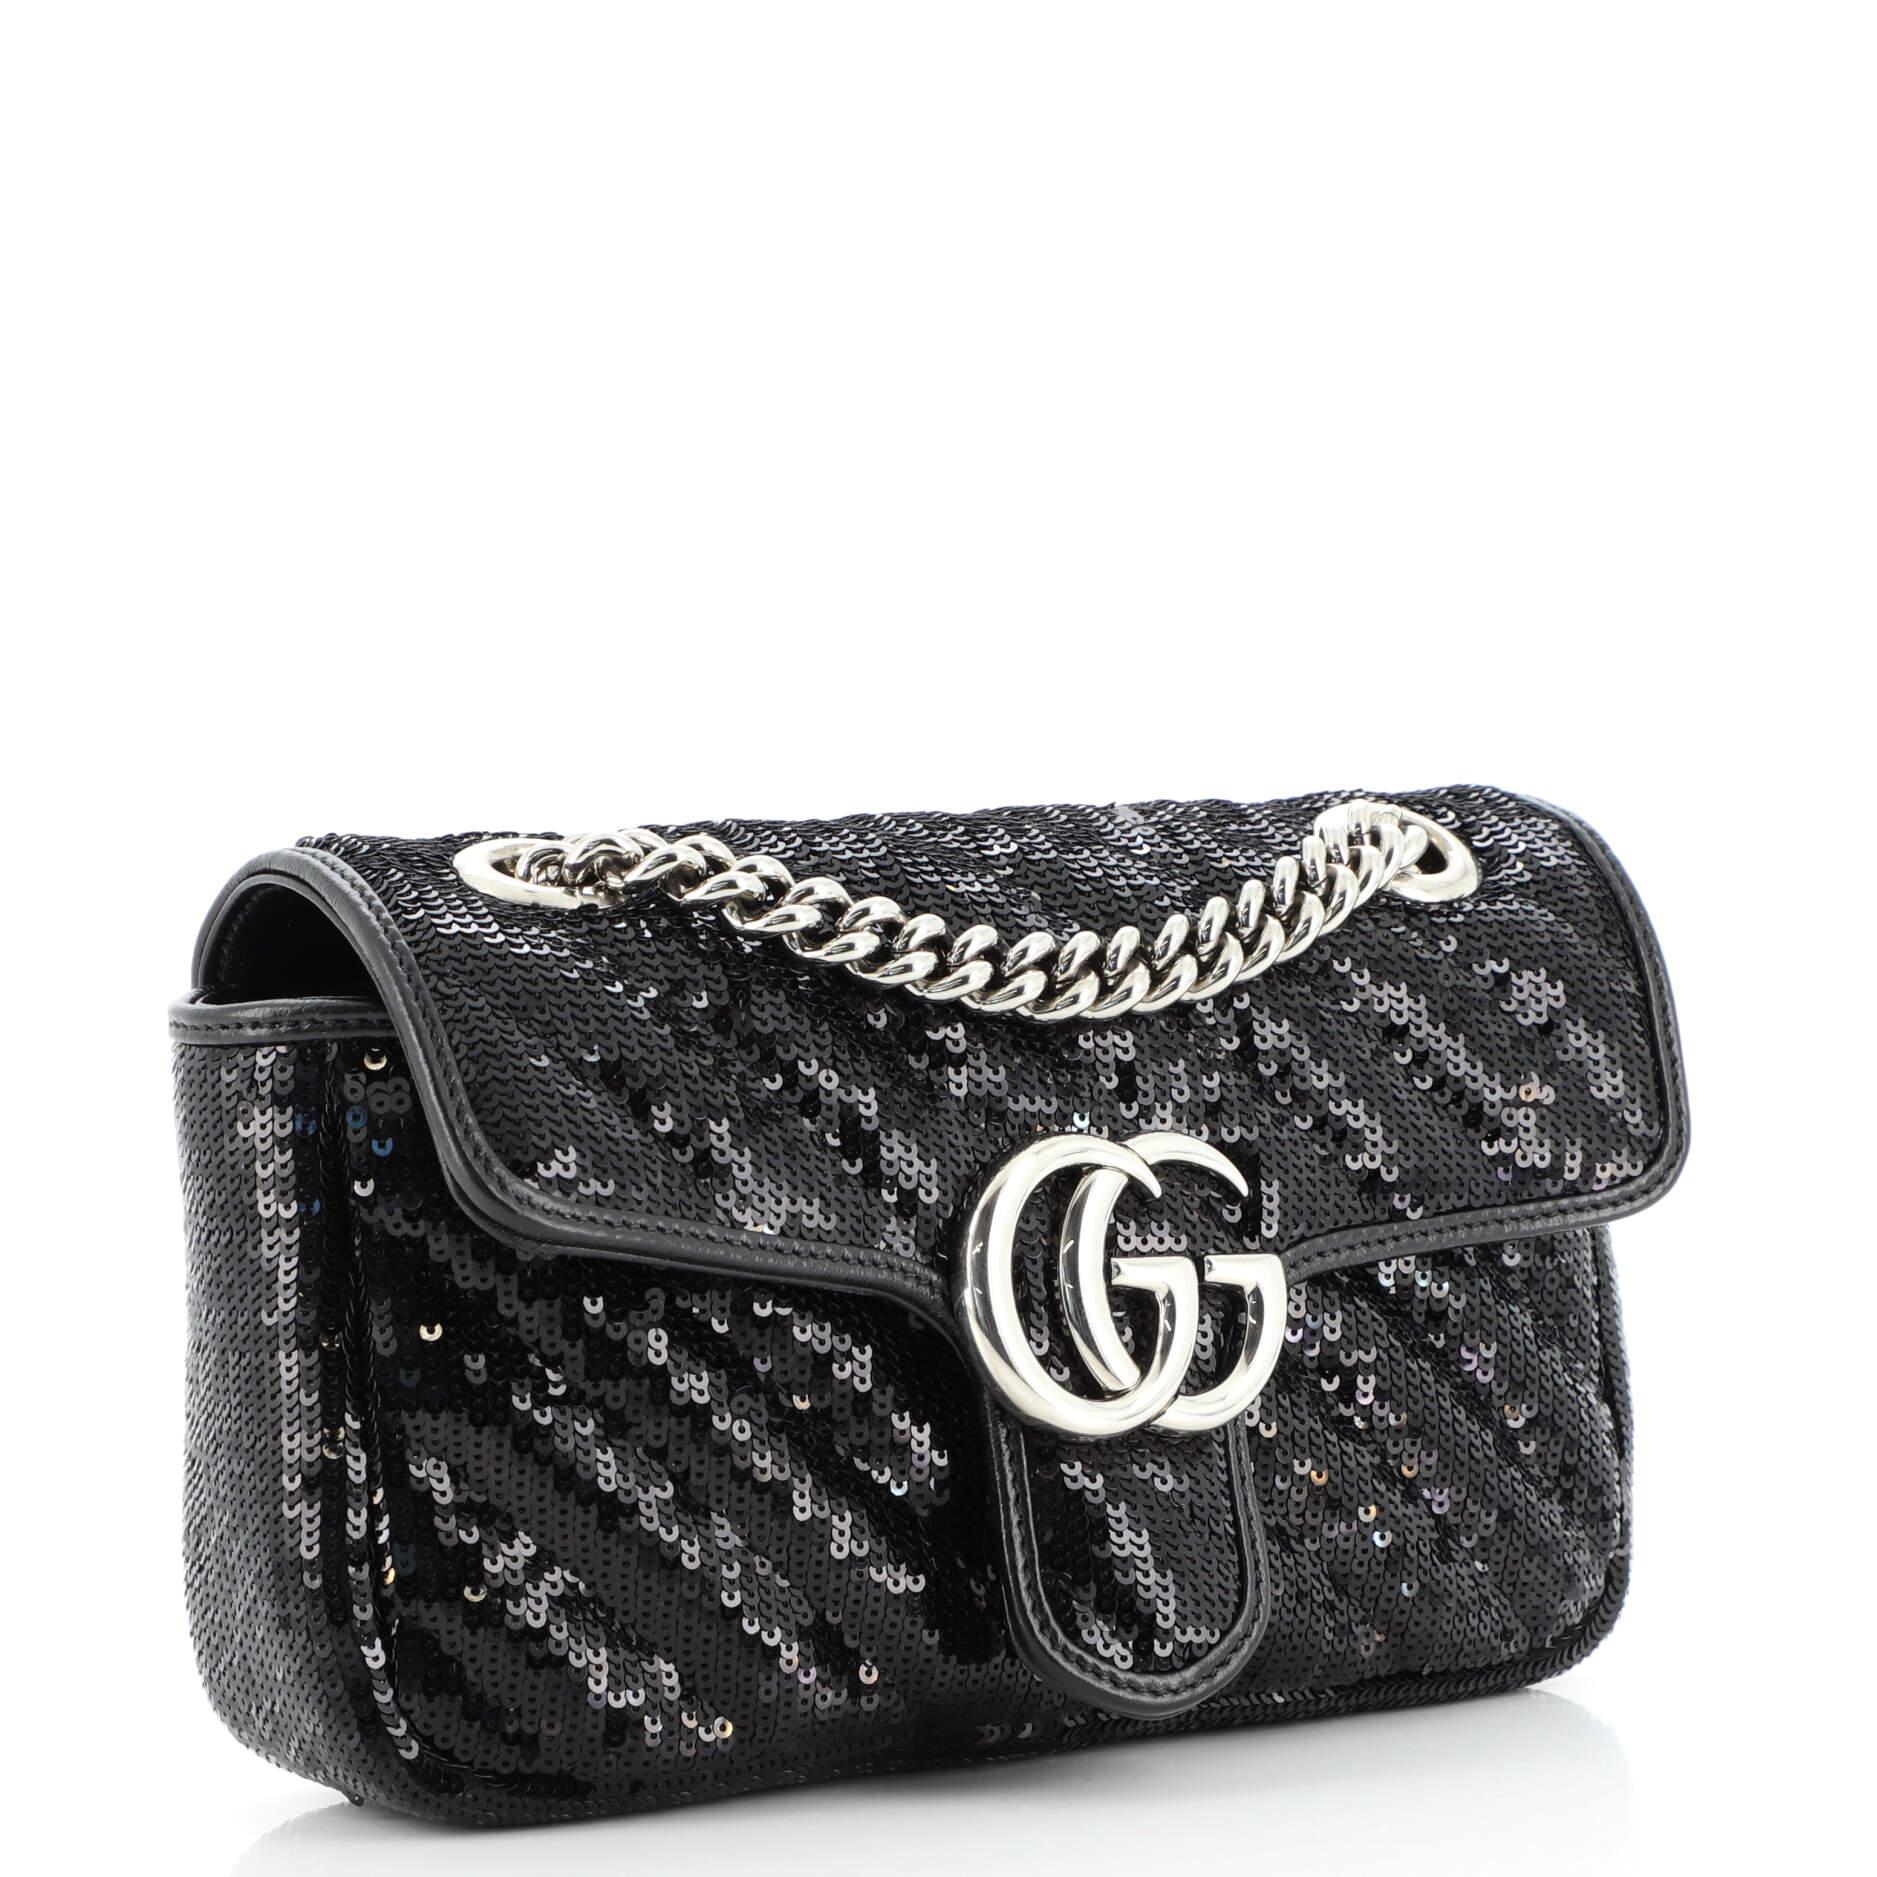 sparkly gucci bag